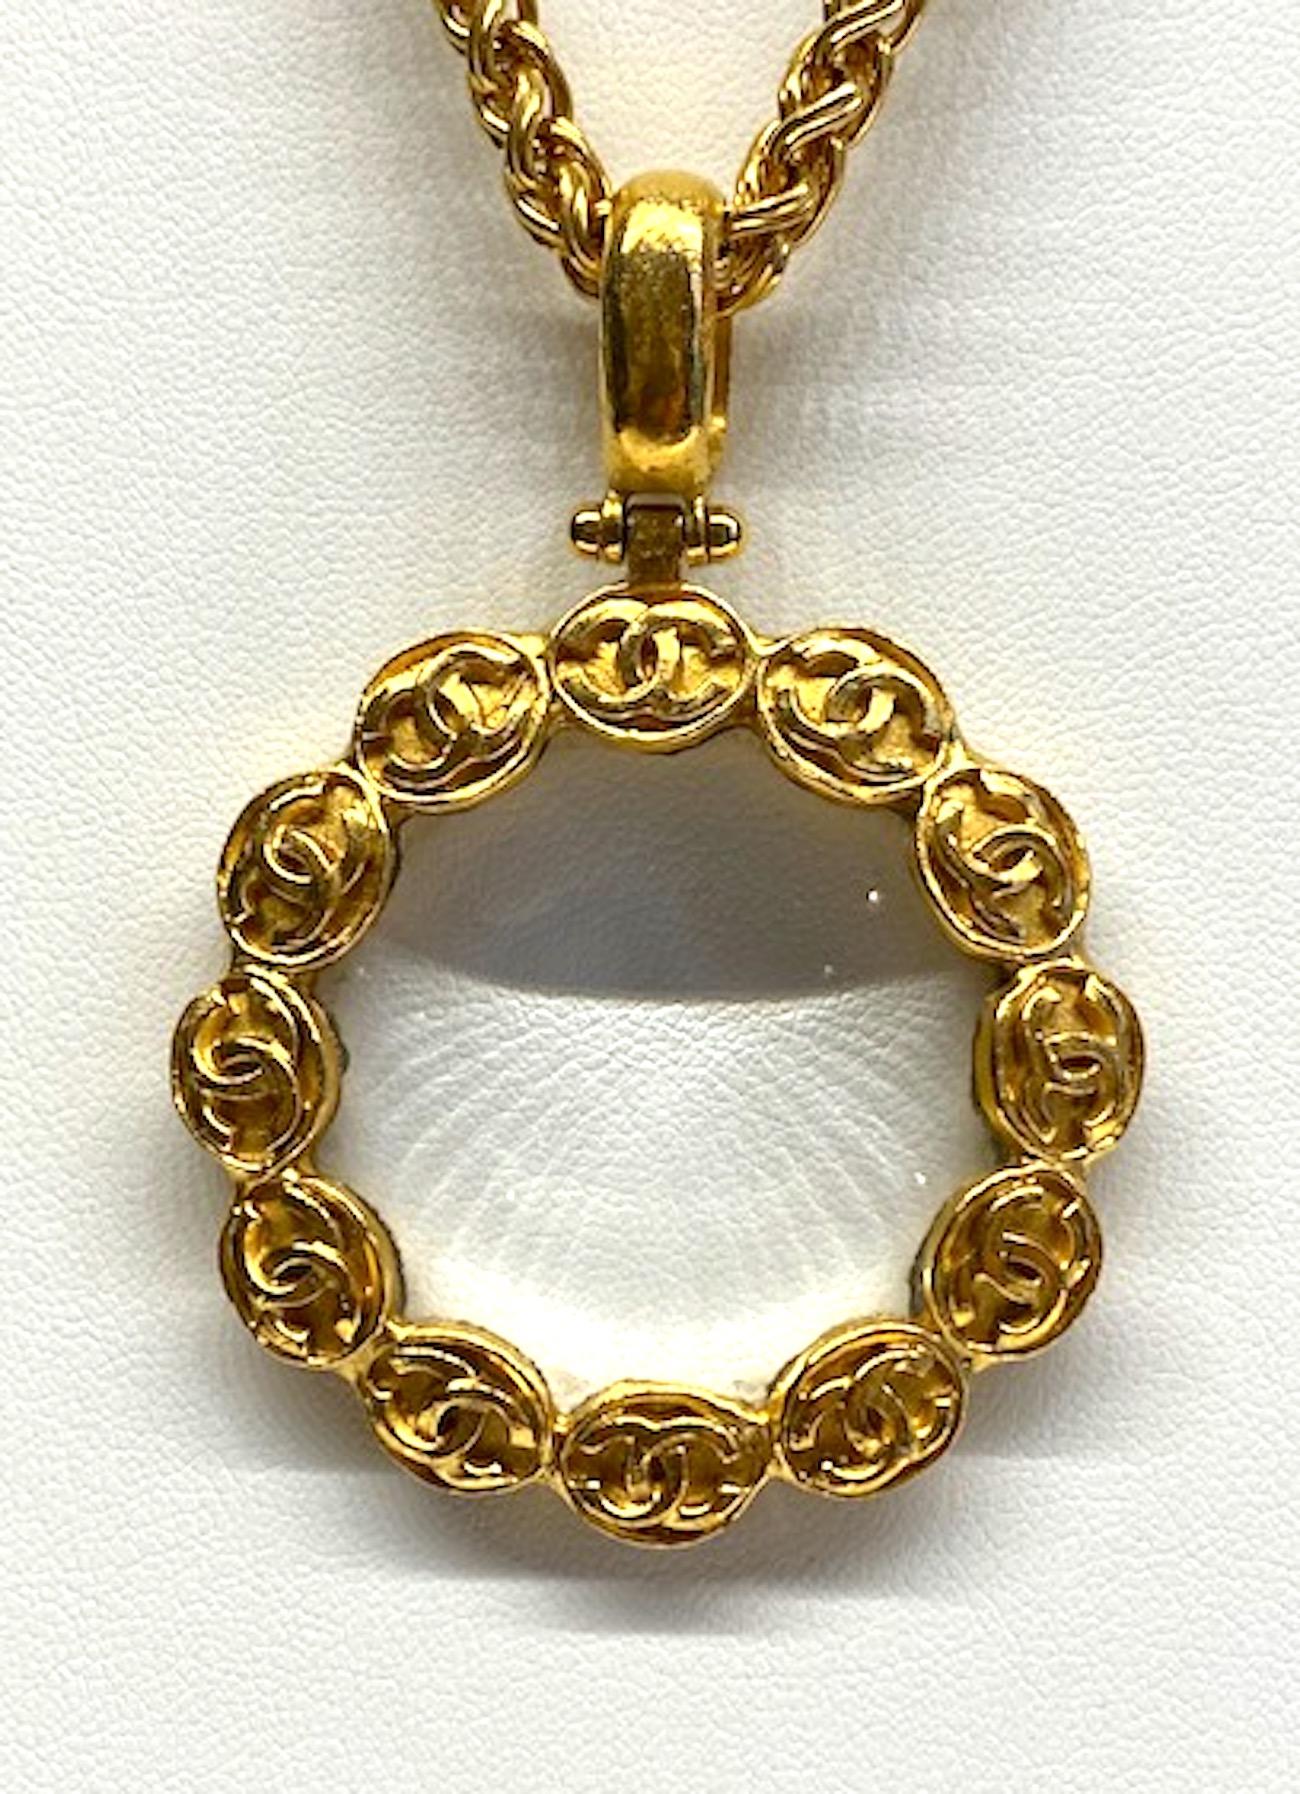 Women's Chanel Magnifying Lens Pendant Necklace, Autumn 1997 Collection